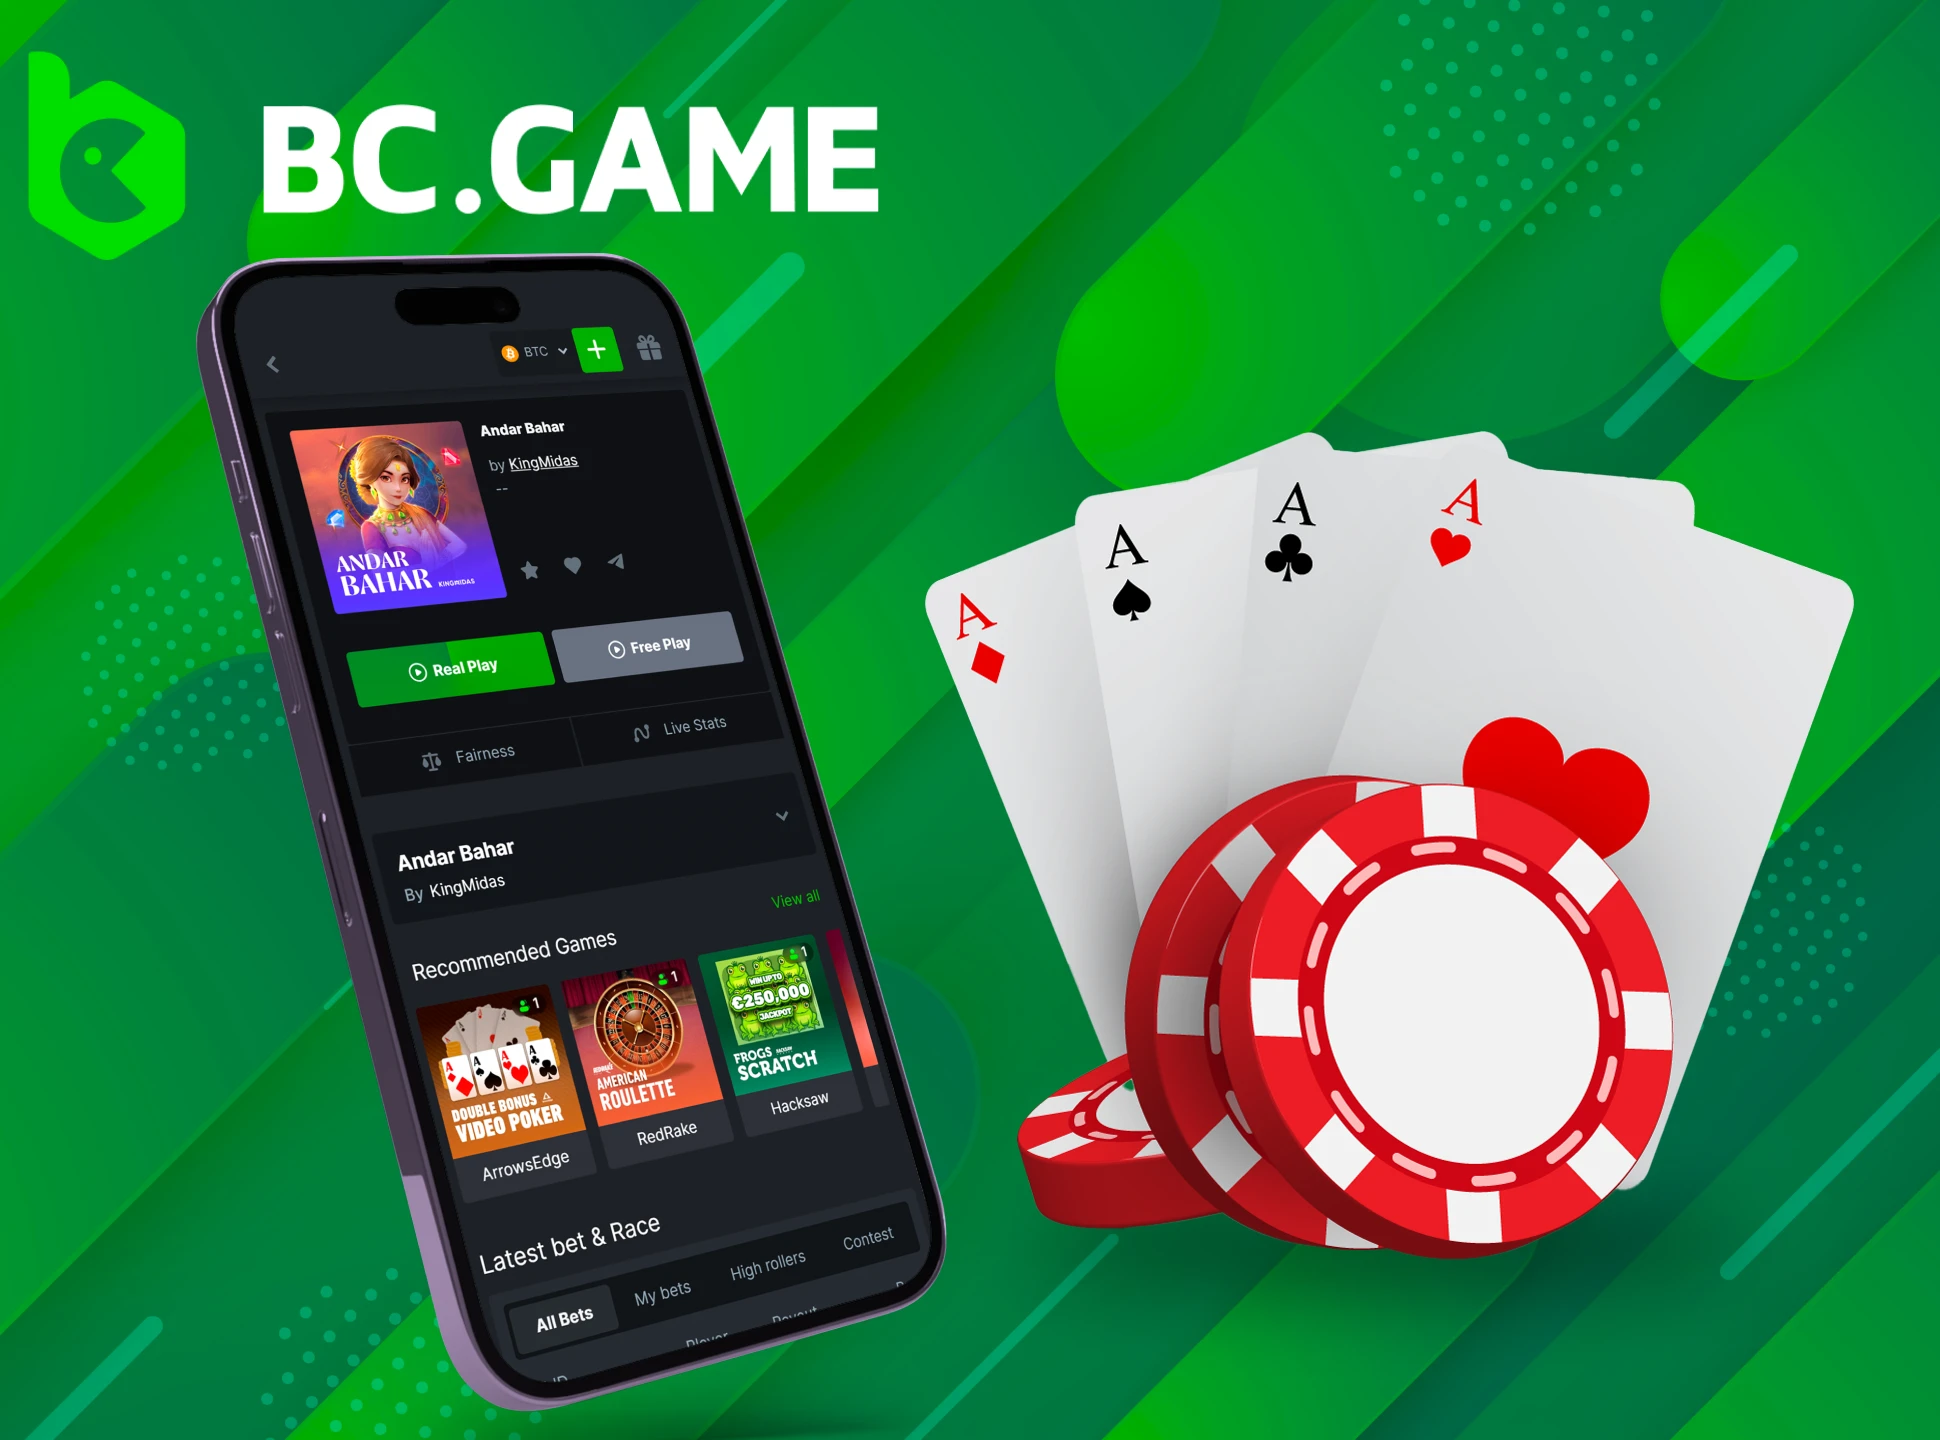 There are many Andar Bahar games available in BC Game app.